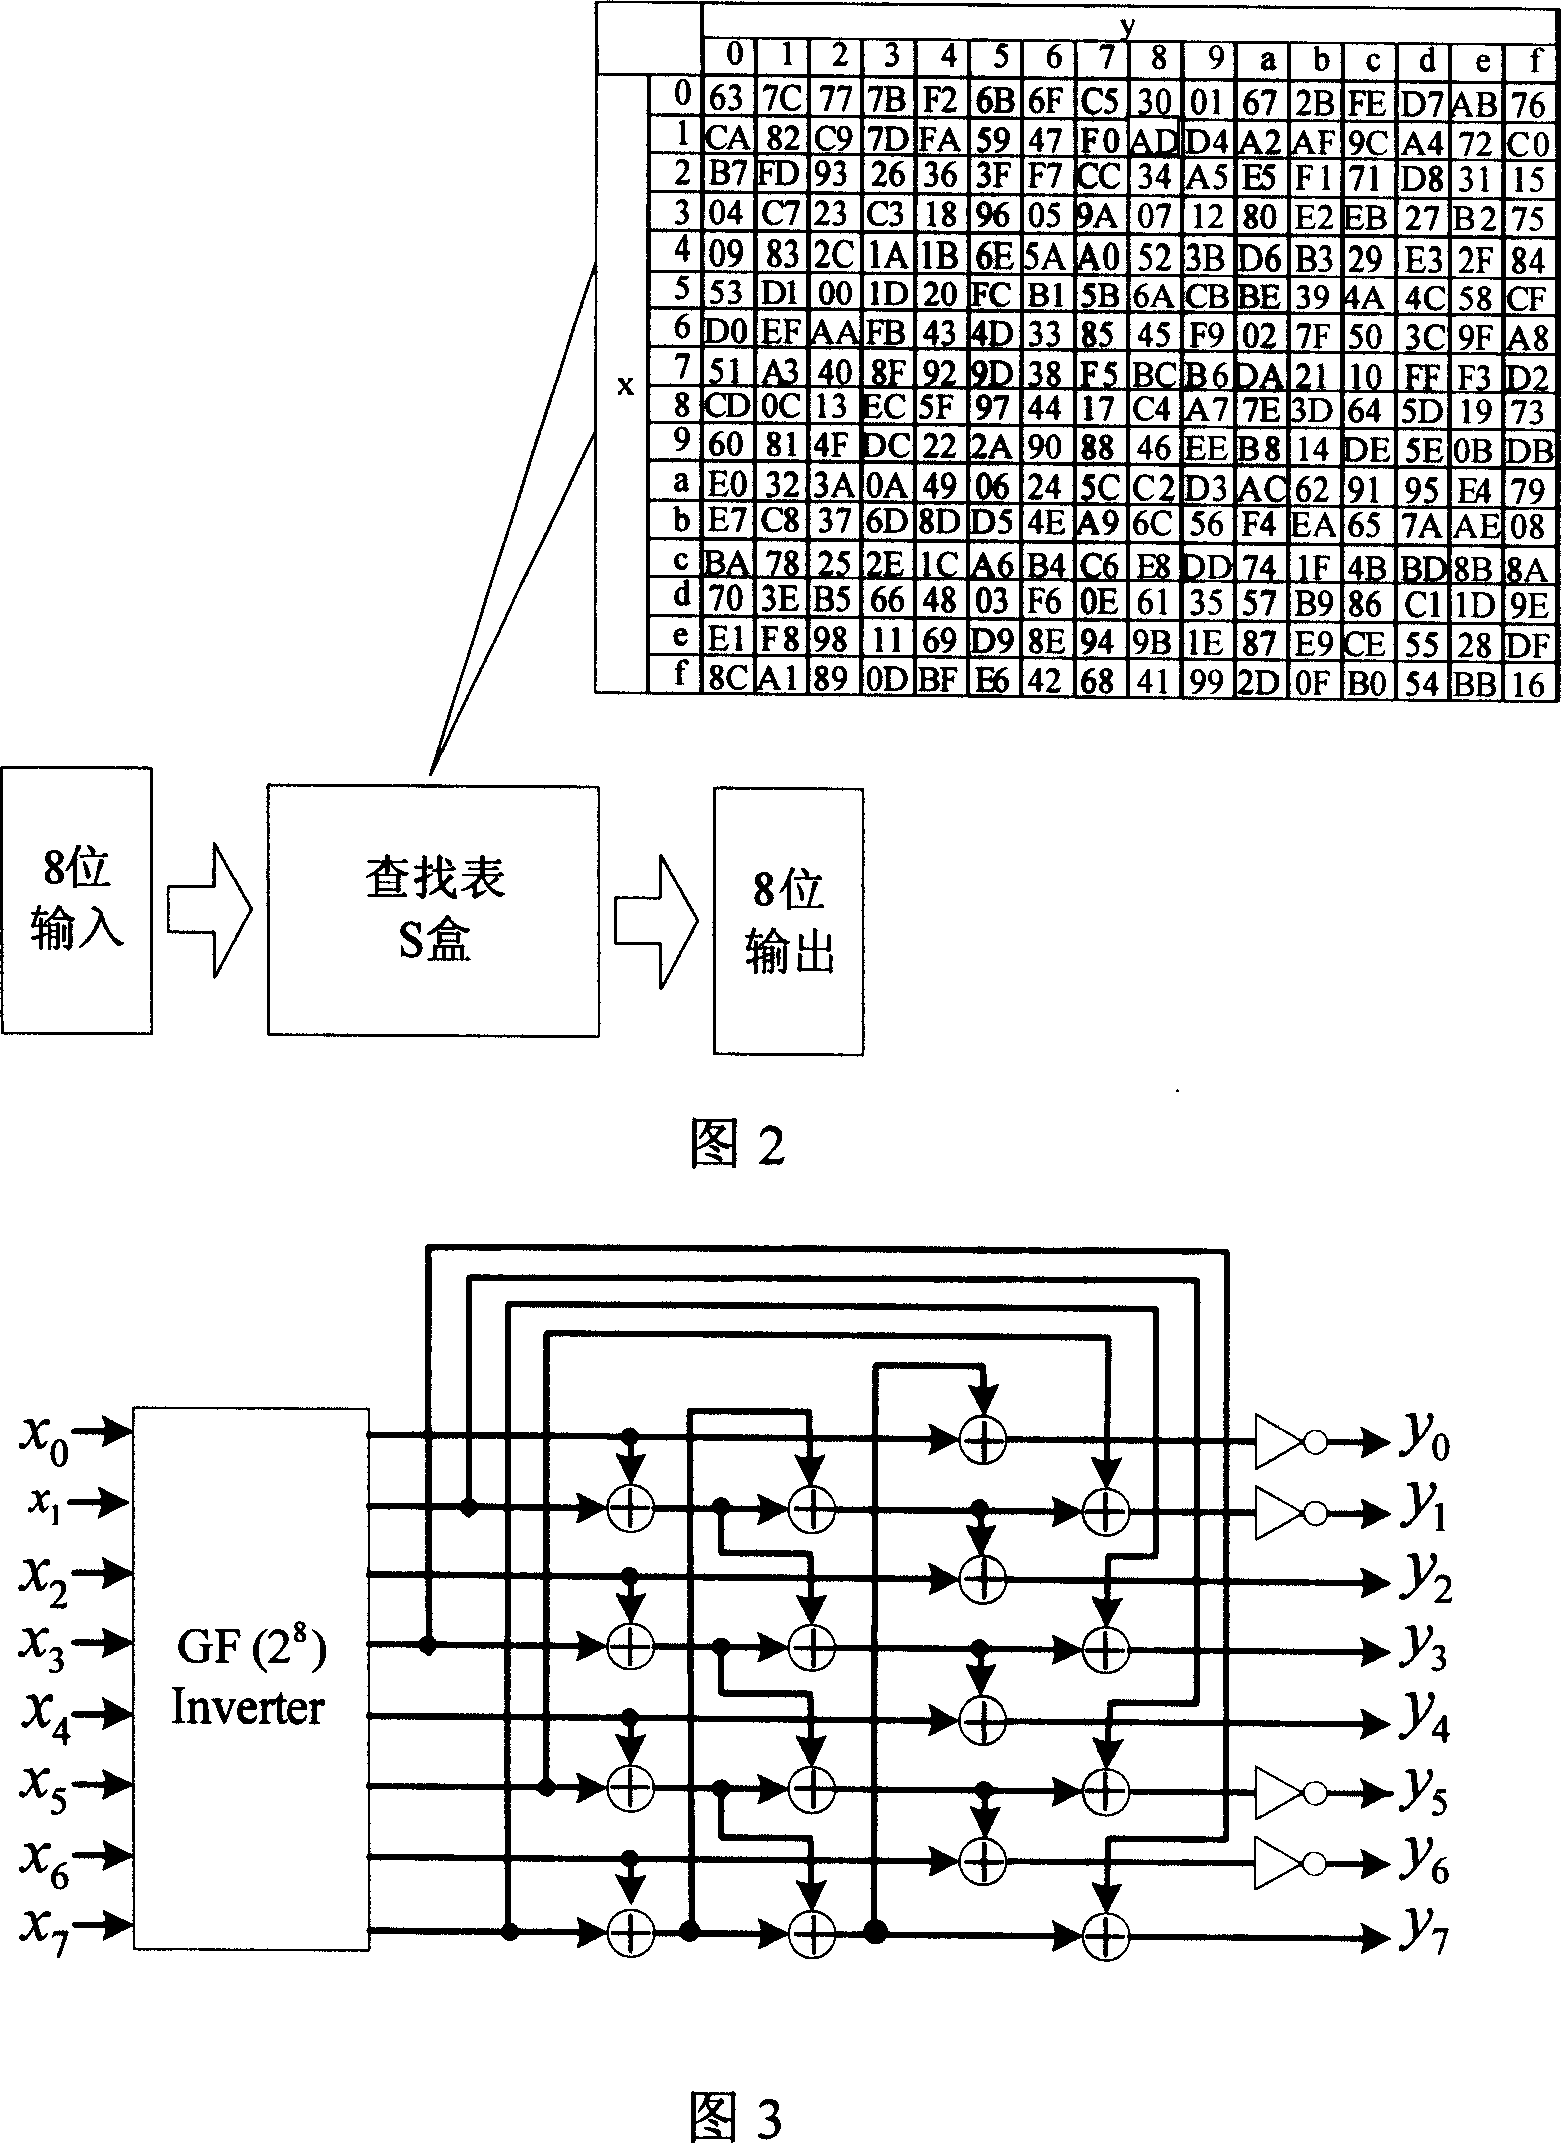 A byte replacement circuit for power consumption attack prevention